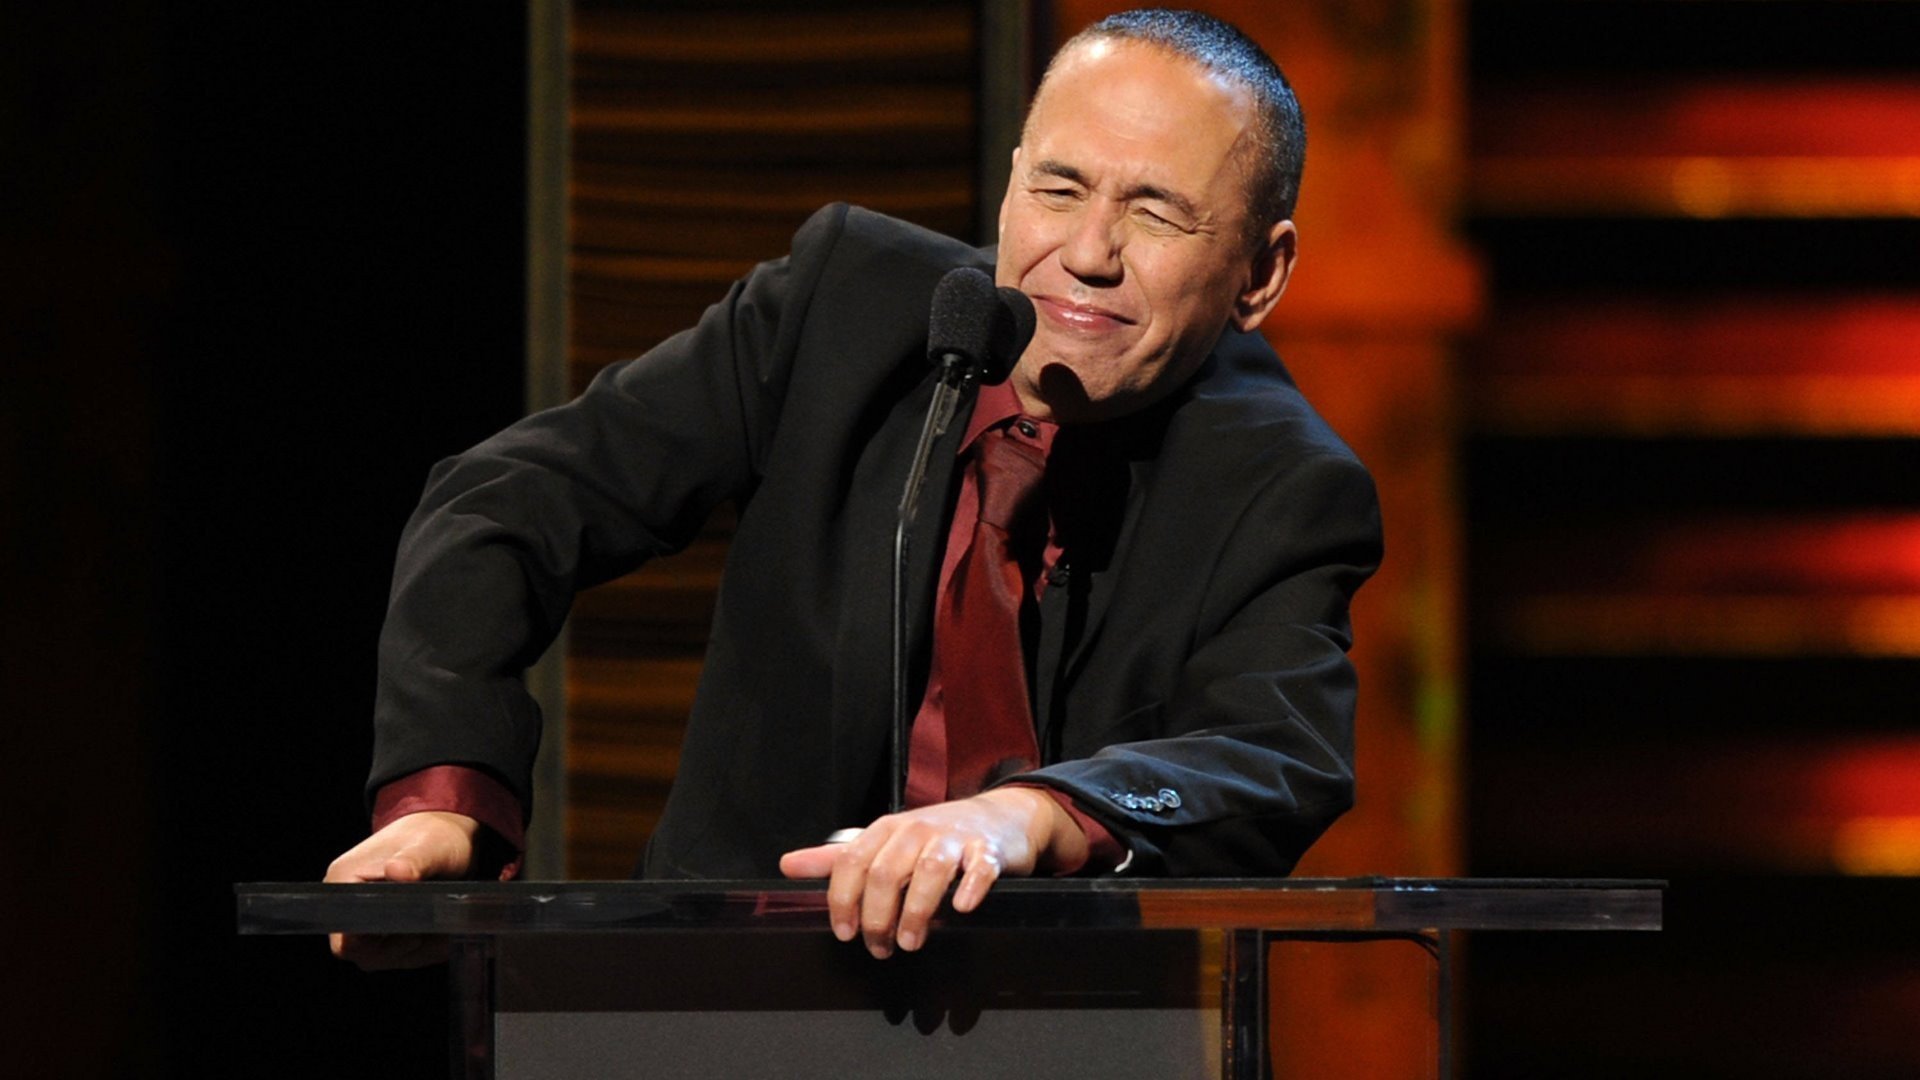 <p>Though it came as a result of a joke bombing horribly, Gilbert Gottfried delivered the most culturally significant "Roast" moment in 2001. The Hugh Hefner Roast was held two weeks after 9/11, and the audience <em>hated</em> Gottfried when he said he was late because his plane had a stopover at the Empire State Building. In desperation, he started telling the Aristocrats joke, turning the room around and inspiring <a href="https://www.imdb.com/title/tt0436078/" rel="noopener noreferrer">Paul Provenza and Penn Jillette's documentary</a> about the world's filthiest joke.</p><p><a href='https://www.msn.com/en-us/community/channel/vid-cj9pqbr0vn9in2b6ddcd8sfgpfq6x6utp44fssrv6mc2gtybw0us'>Did you enjoy this slideshow? Follow us on MSN to see more of our exclusive entertainment content.</a></p>